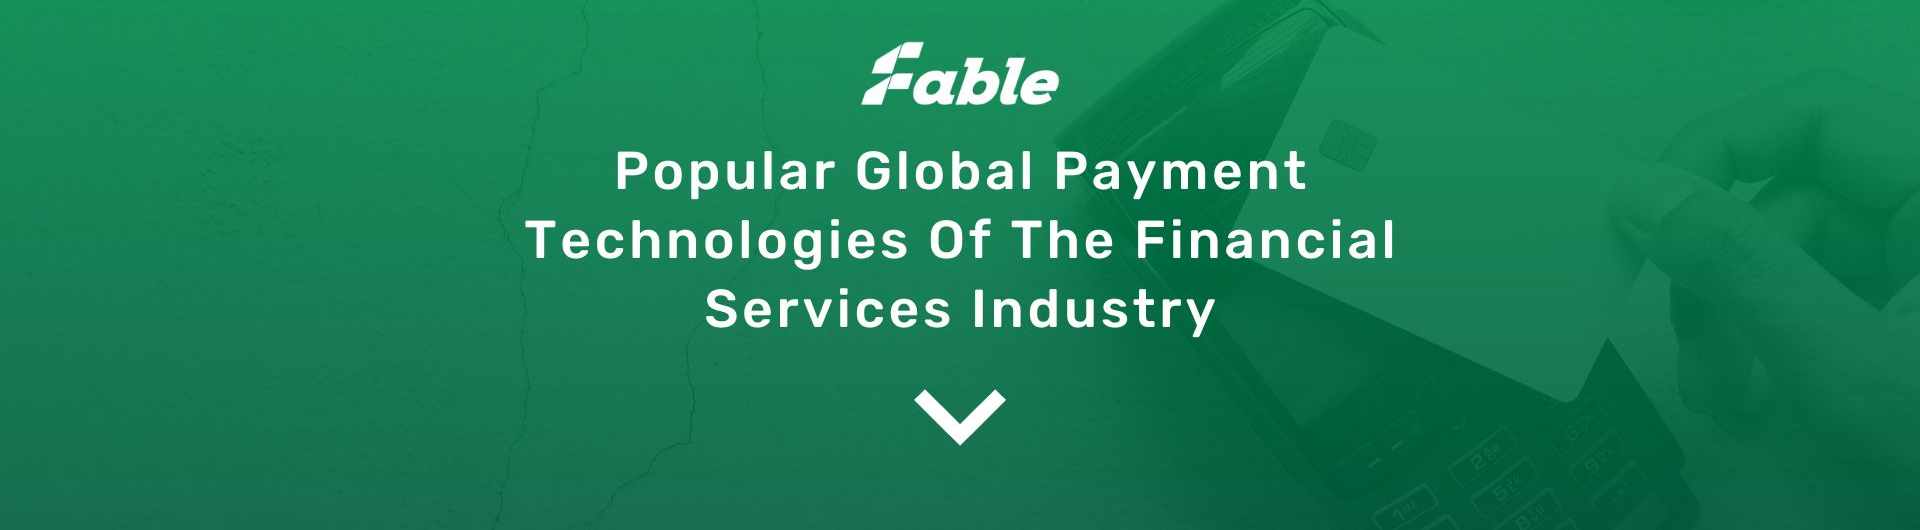 Popular Global Payment Technologies Of The Financial Services Industry